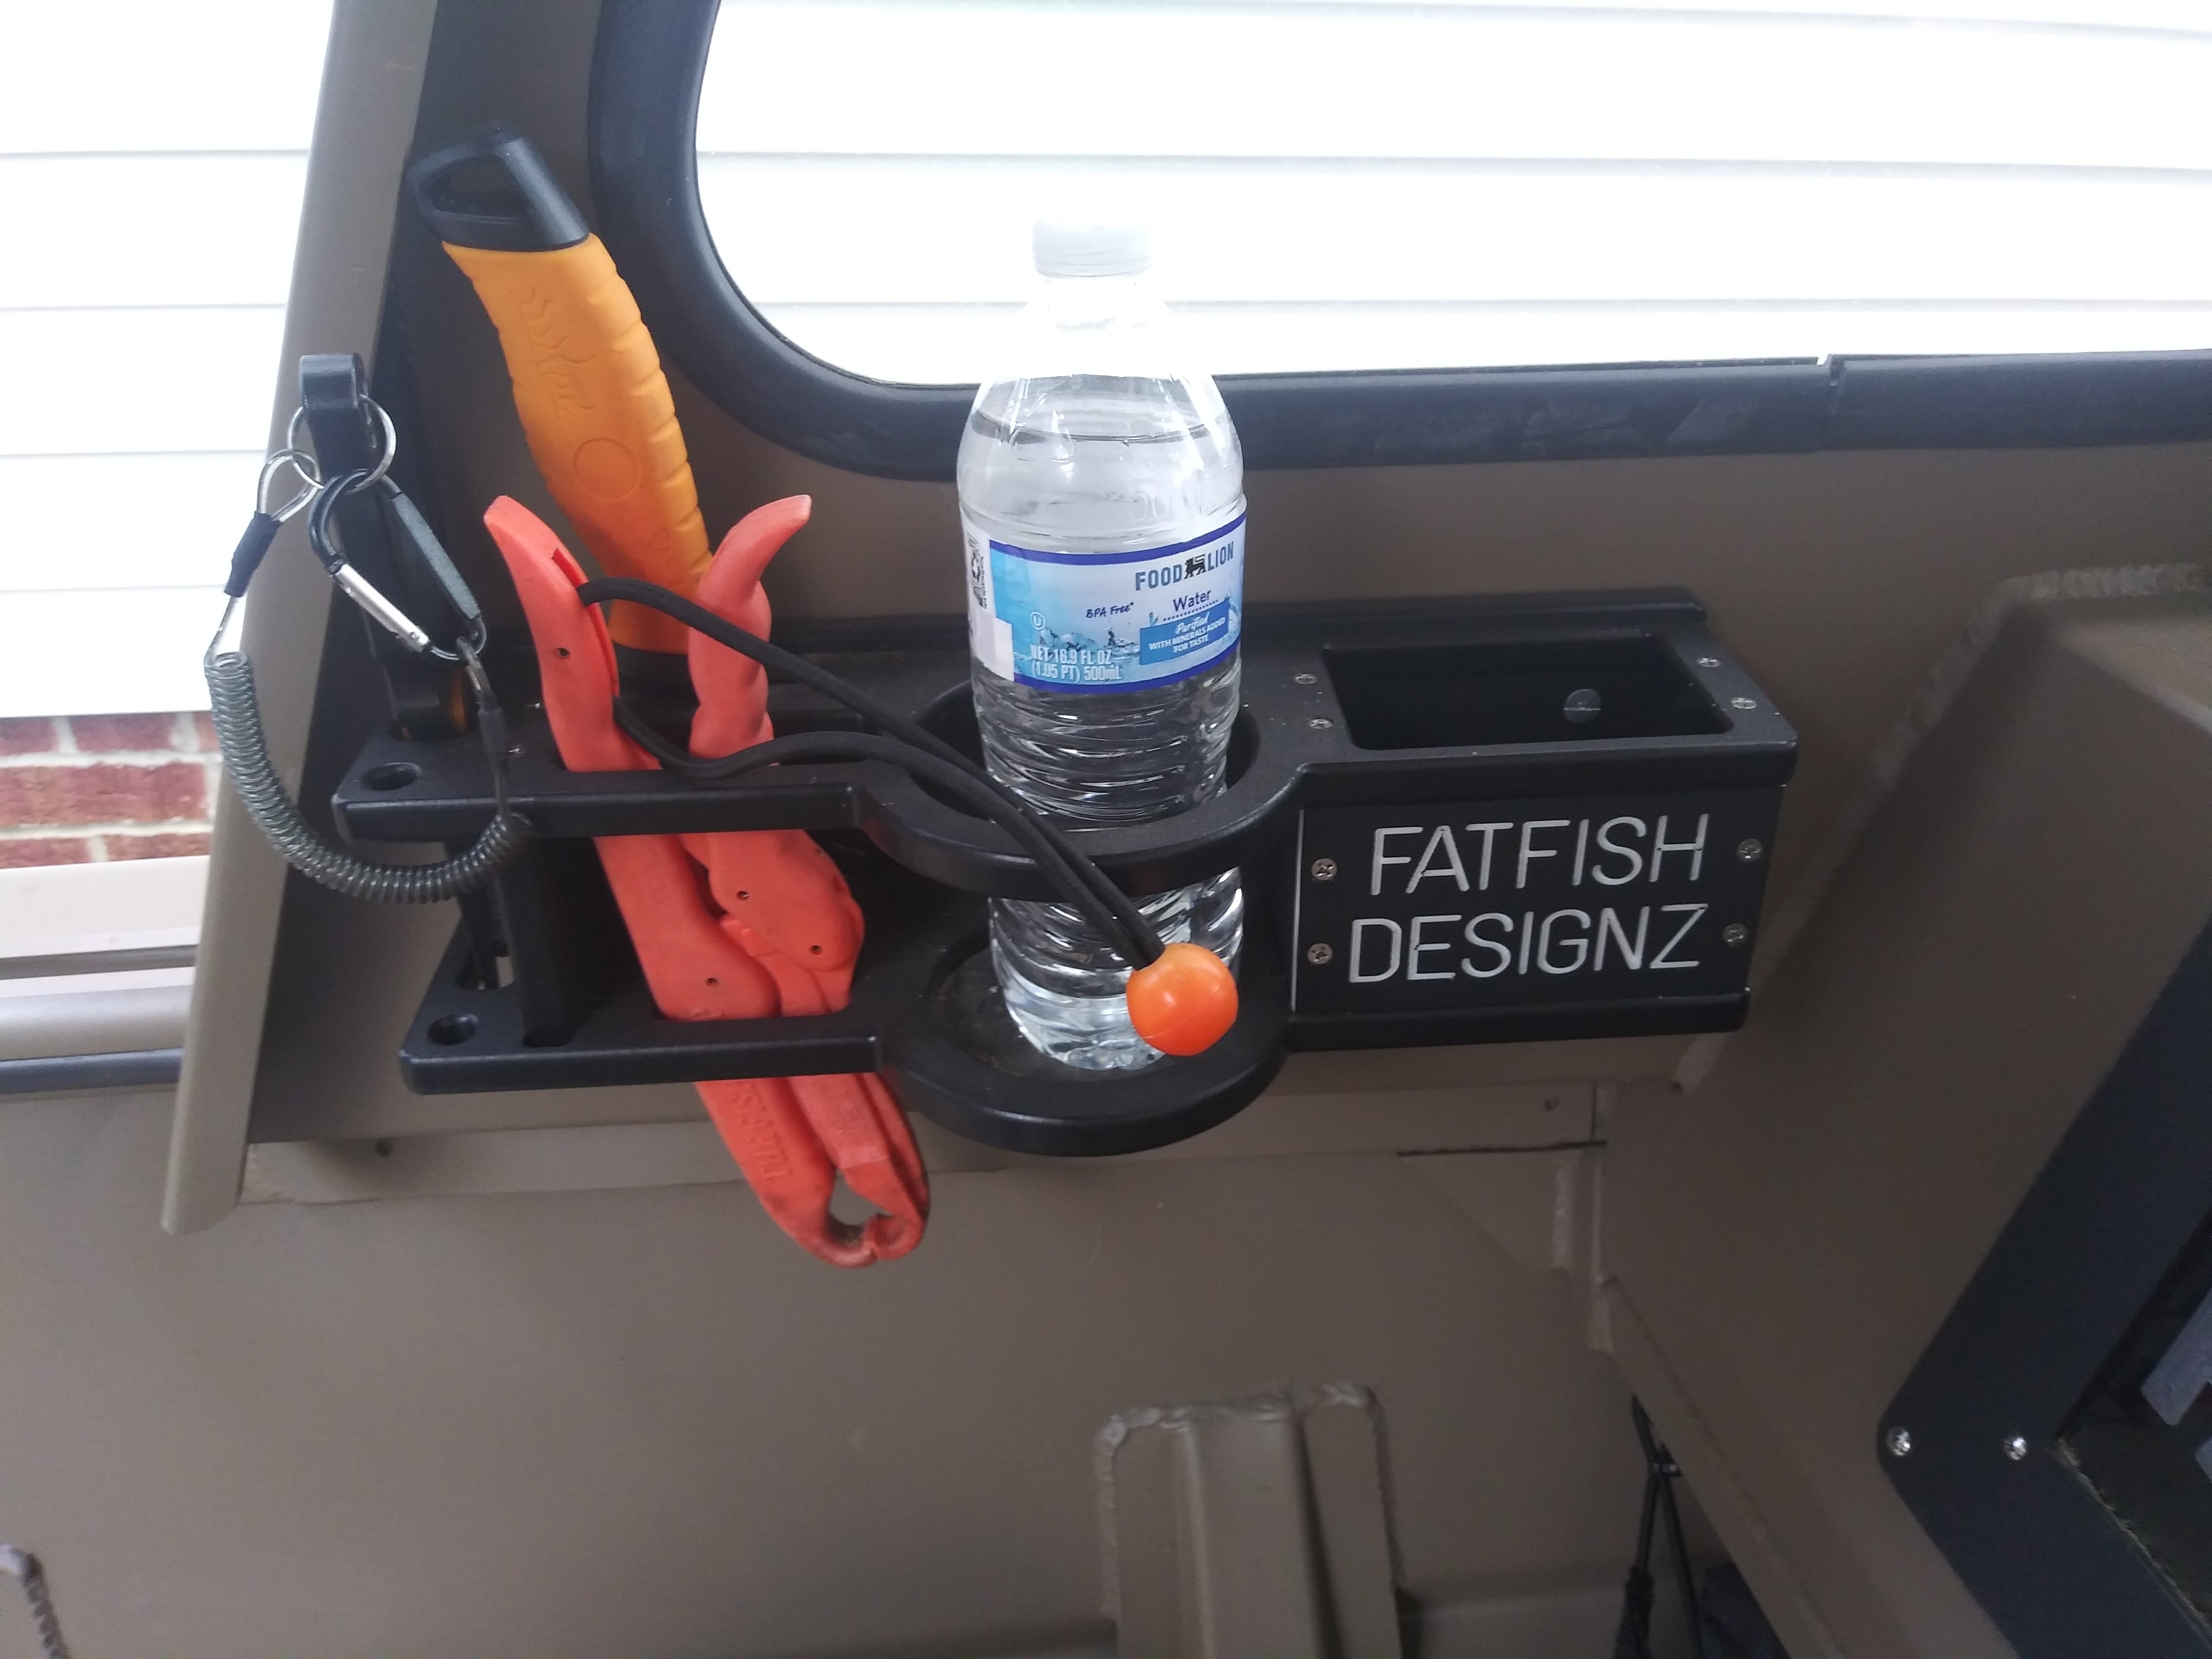 all in one tool holder larger cup holder -fish grip holder- knife holder- pliers holder-with tools, fat fish designz